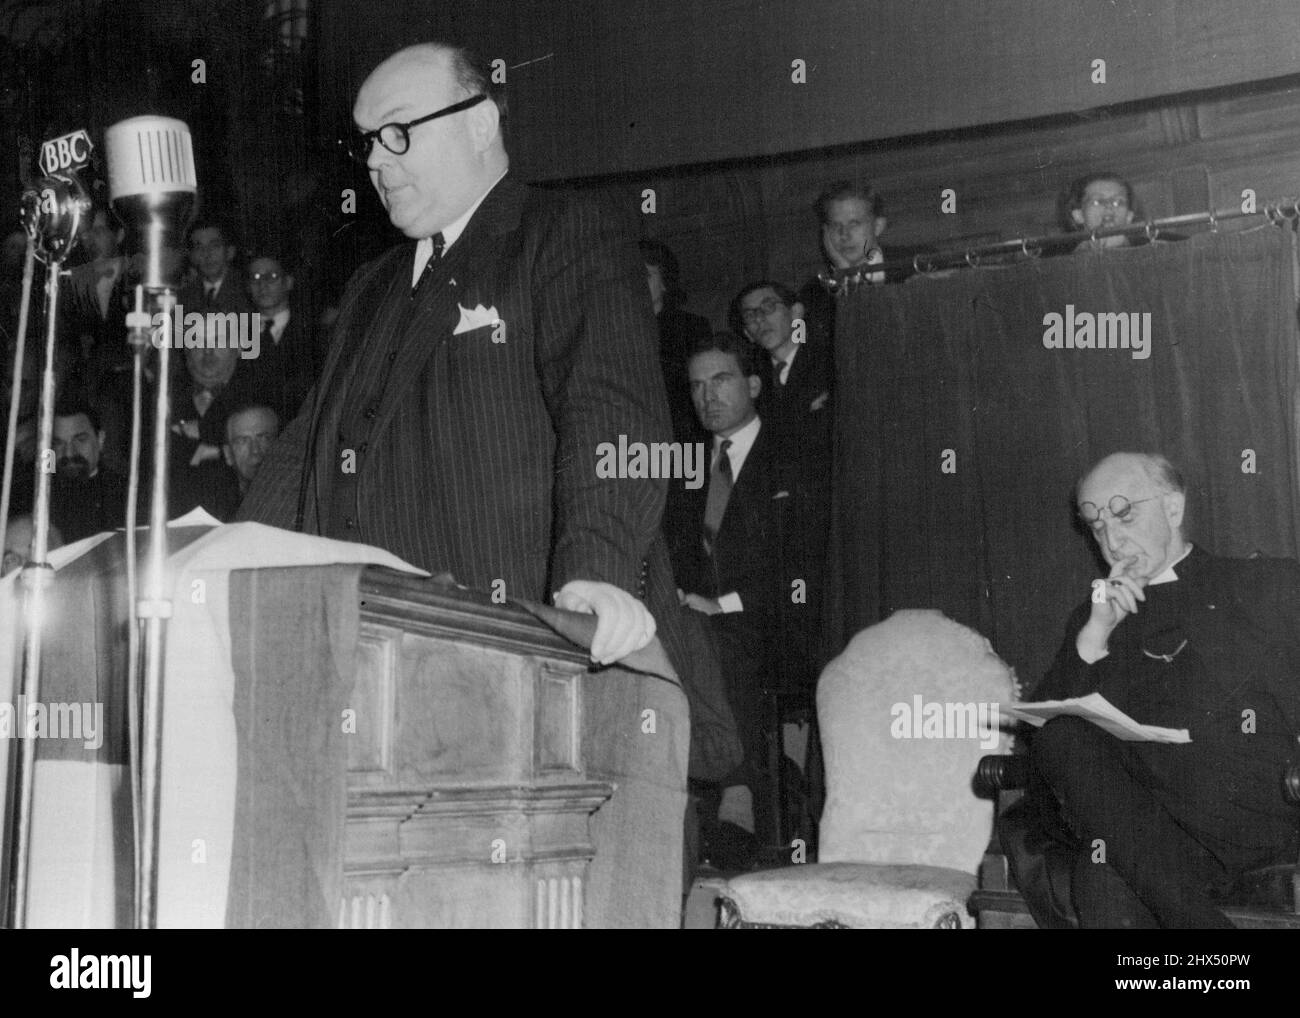 M. Paul-Henri Spaak speaking at the public meeting at the Kingsway Hall.Seated behind him, listening intently with glasses pushed up on his forehead is the Archbishop of Canterbury, Doctor Geoffrey Fisher. European Assembly President Addresses London Meeting, M. Spaak  On Two-Day Visit -- President of the European Assembly, M. Paul-Henri Spaak, who is on a two-day visit to London ***** the invitation of the European movement, addressed ***** large public meeting at the Kingsway Hall, held ***** the auspices of the United Kingdom Council of the European movement.Other speakers at the meeting in Stock Photo